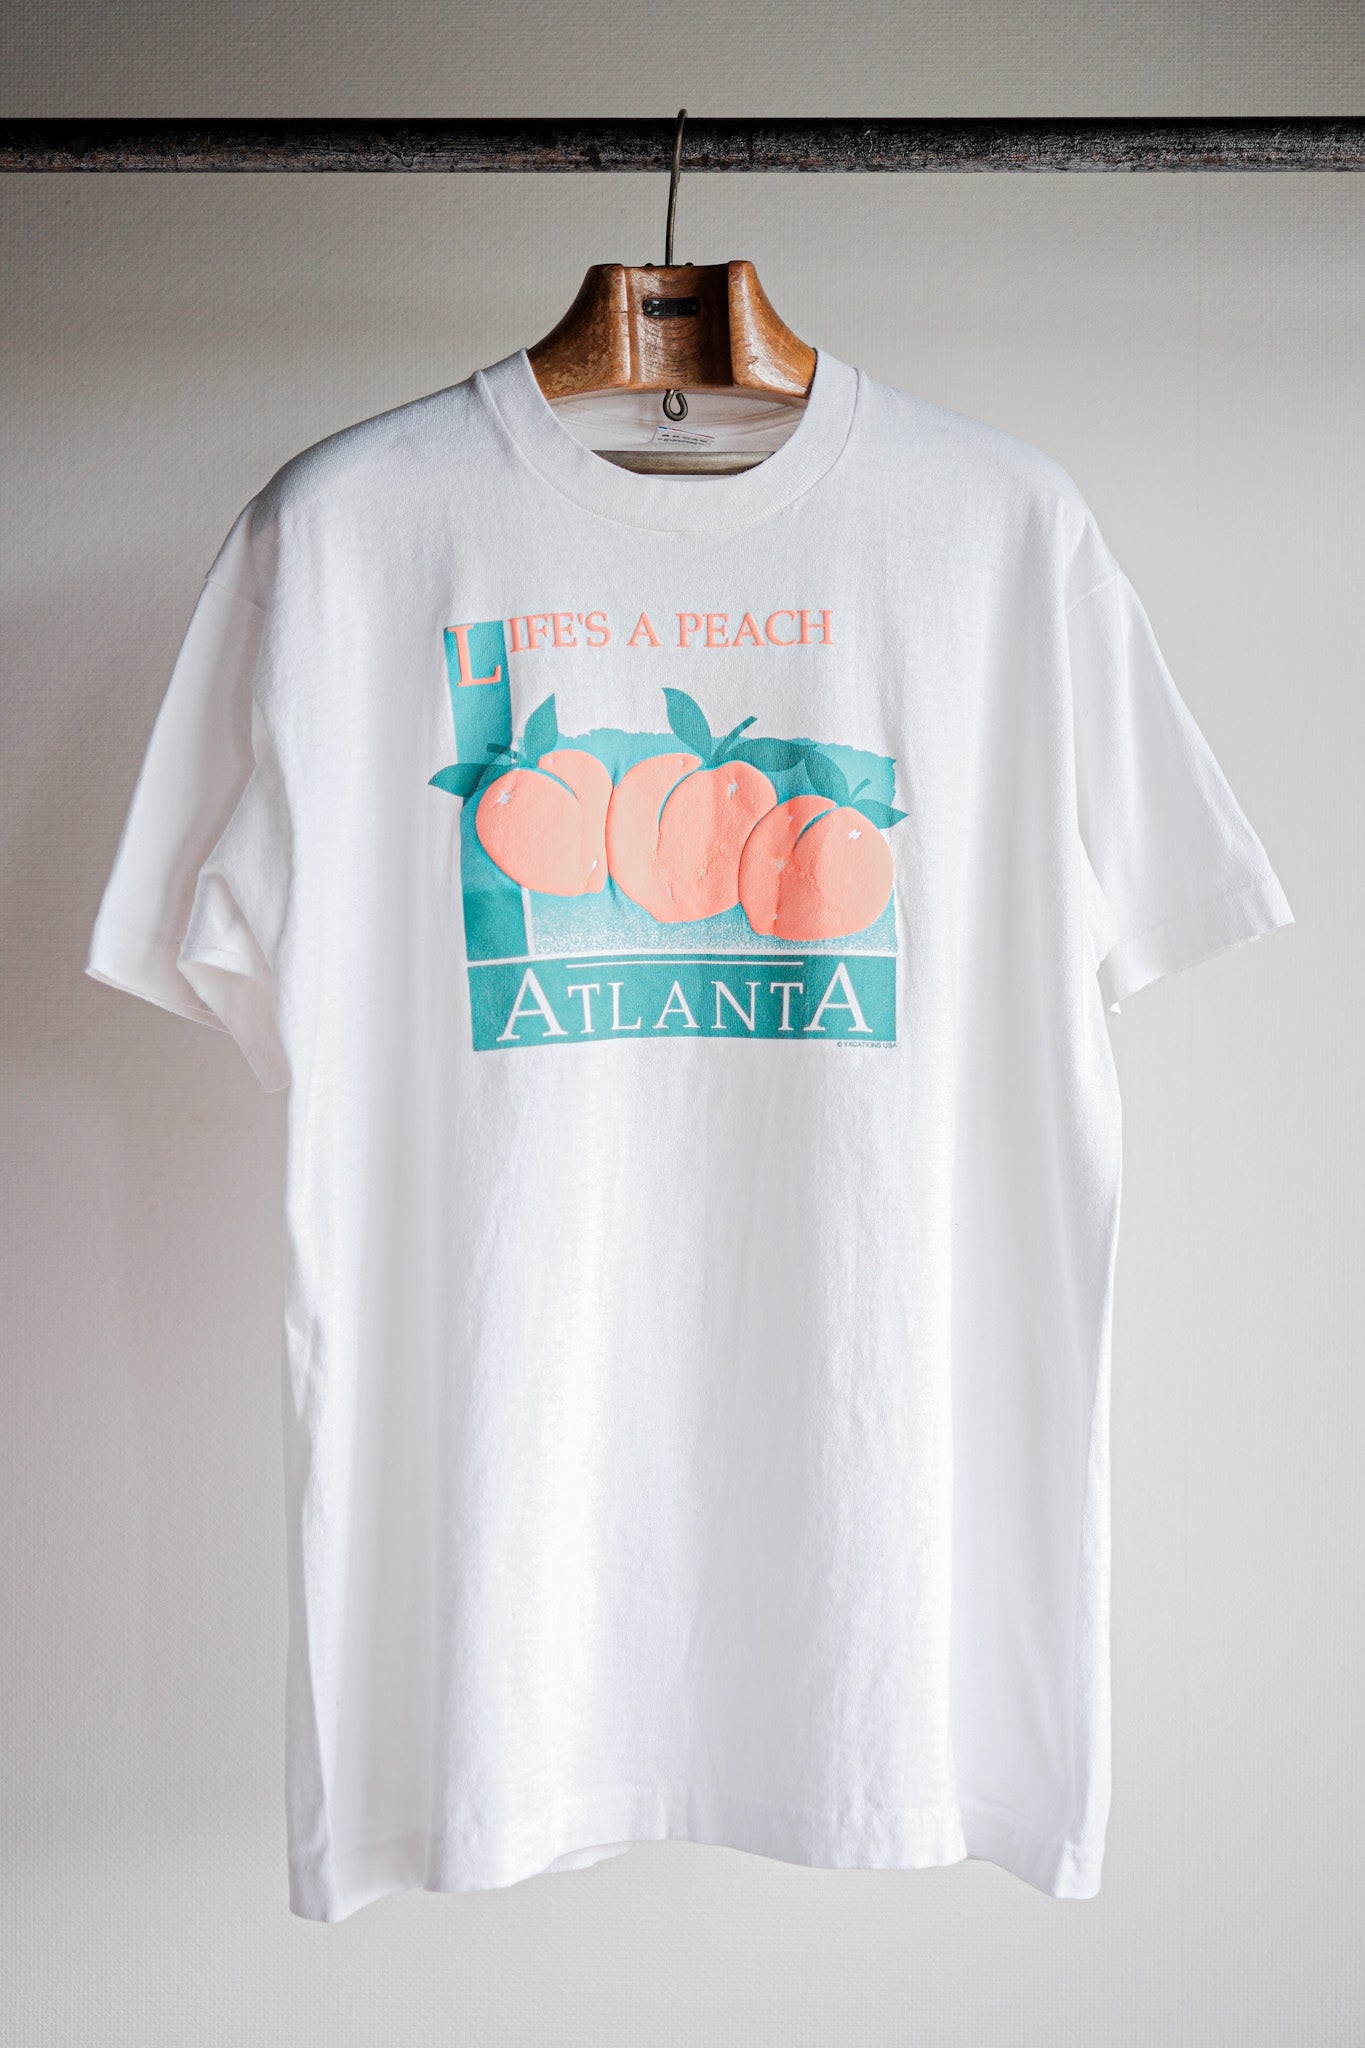 [~ 90's] Vintage Graphic Print T-Shirt Size.xl "Life's a Peach" "Made in U.S.A."